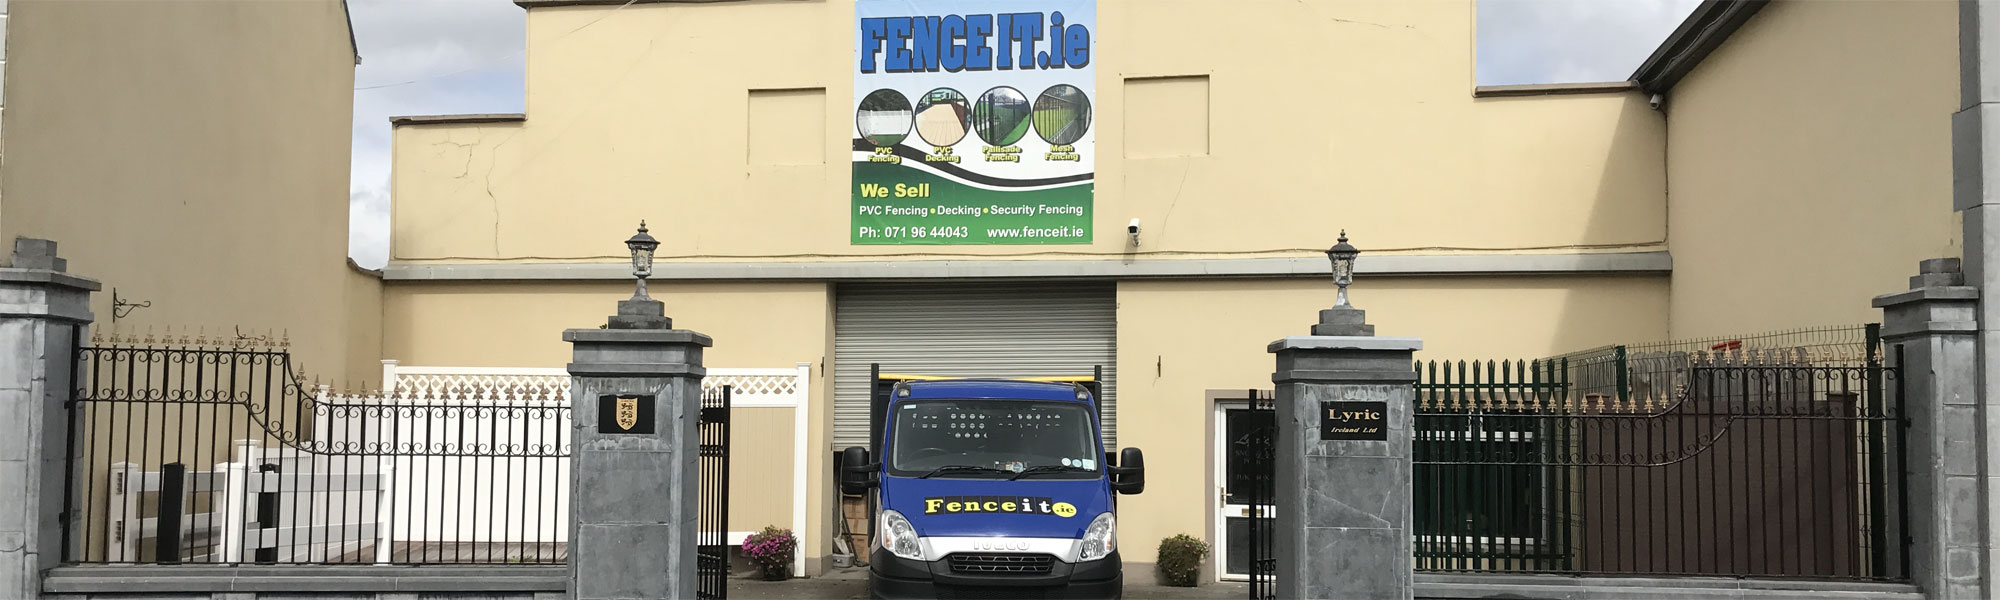 Fencing solutions from Fenceit Ireland